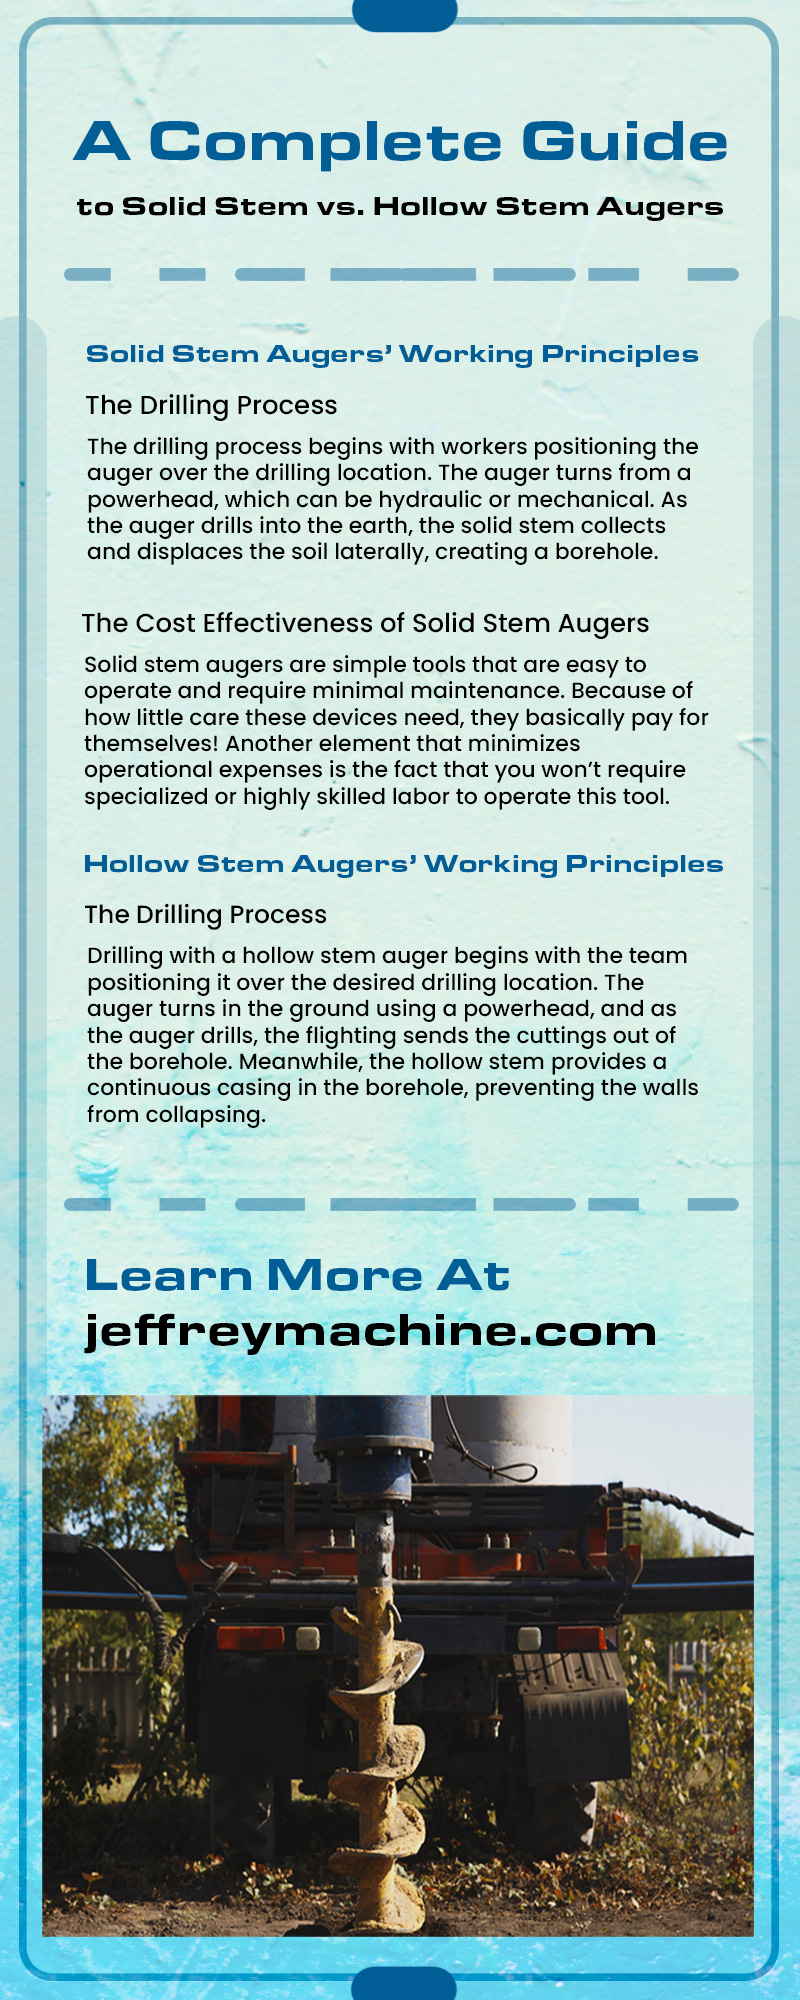 A Complete Guide to Solid Stem vs. Hollow Stem Augers